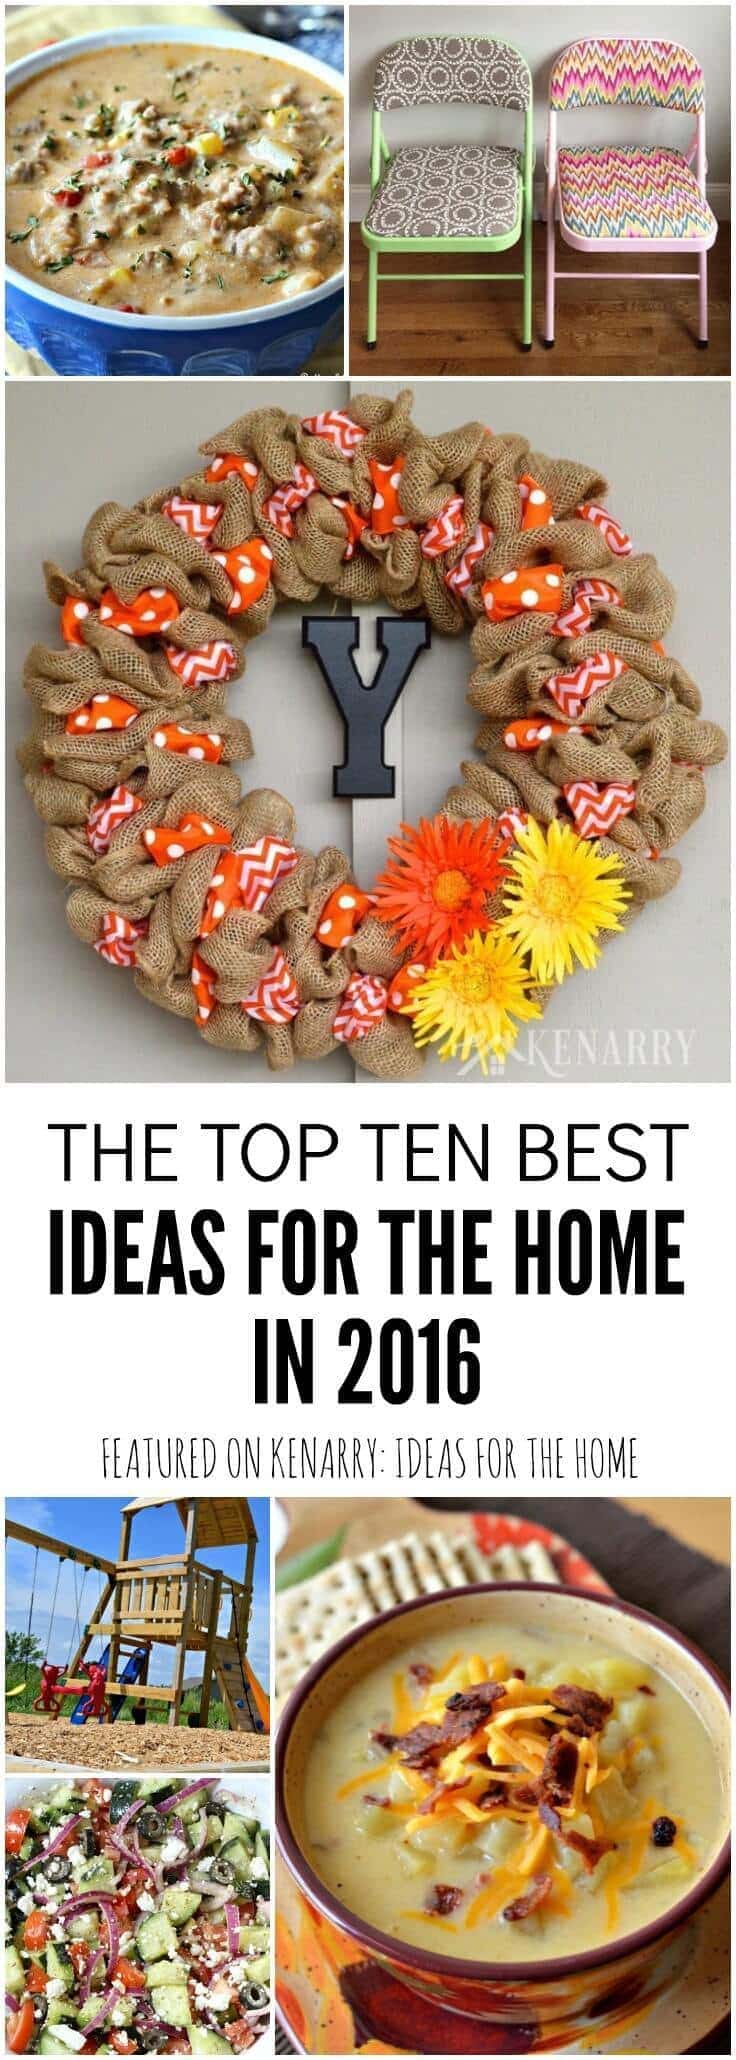 Wow! These were the top 10 recipes, crafts, home decor and DIY projects in 2016. I can't wait to try these popular ideas for the home.